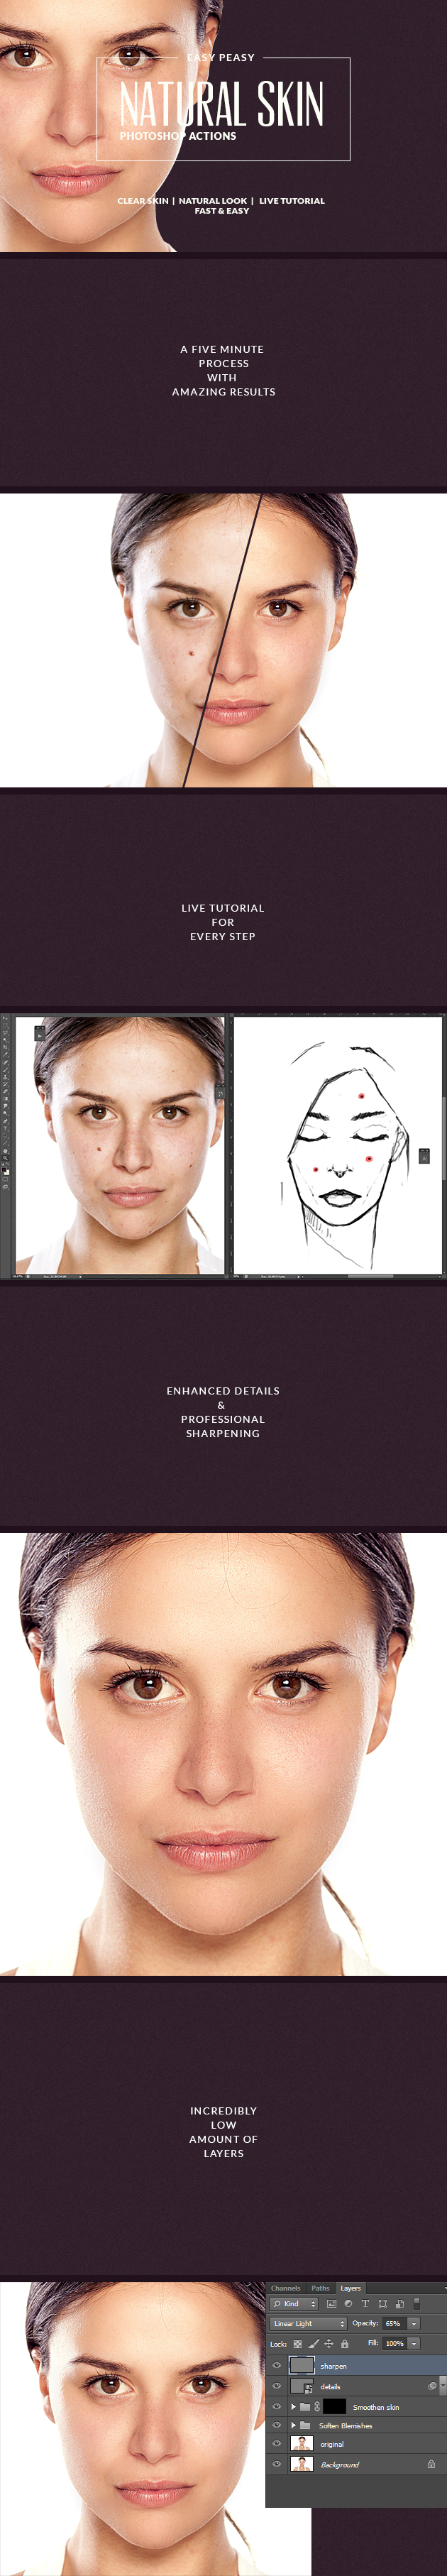 Get Flawless Skin with these Revolutionary Natural Skin PS Actions - Photoshop Tutorials Lorelei Web Design